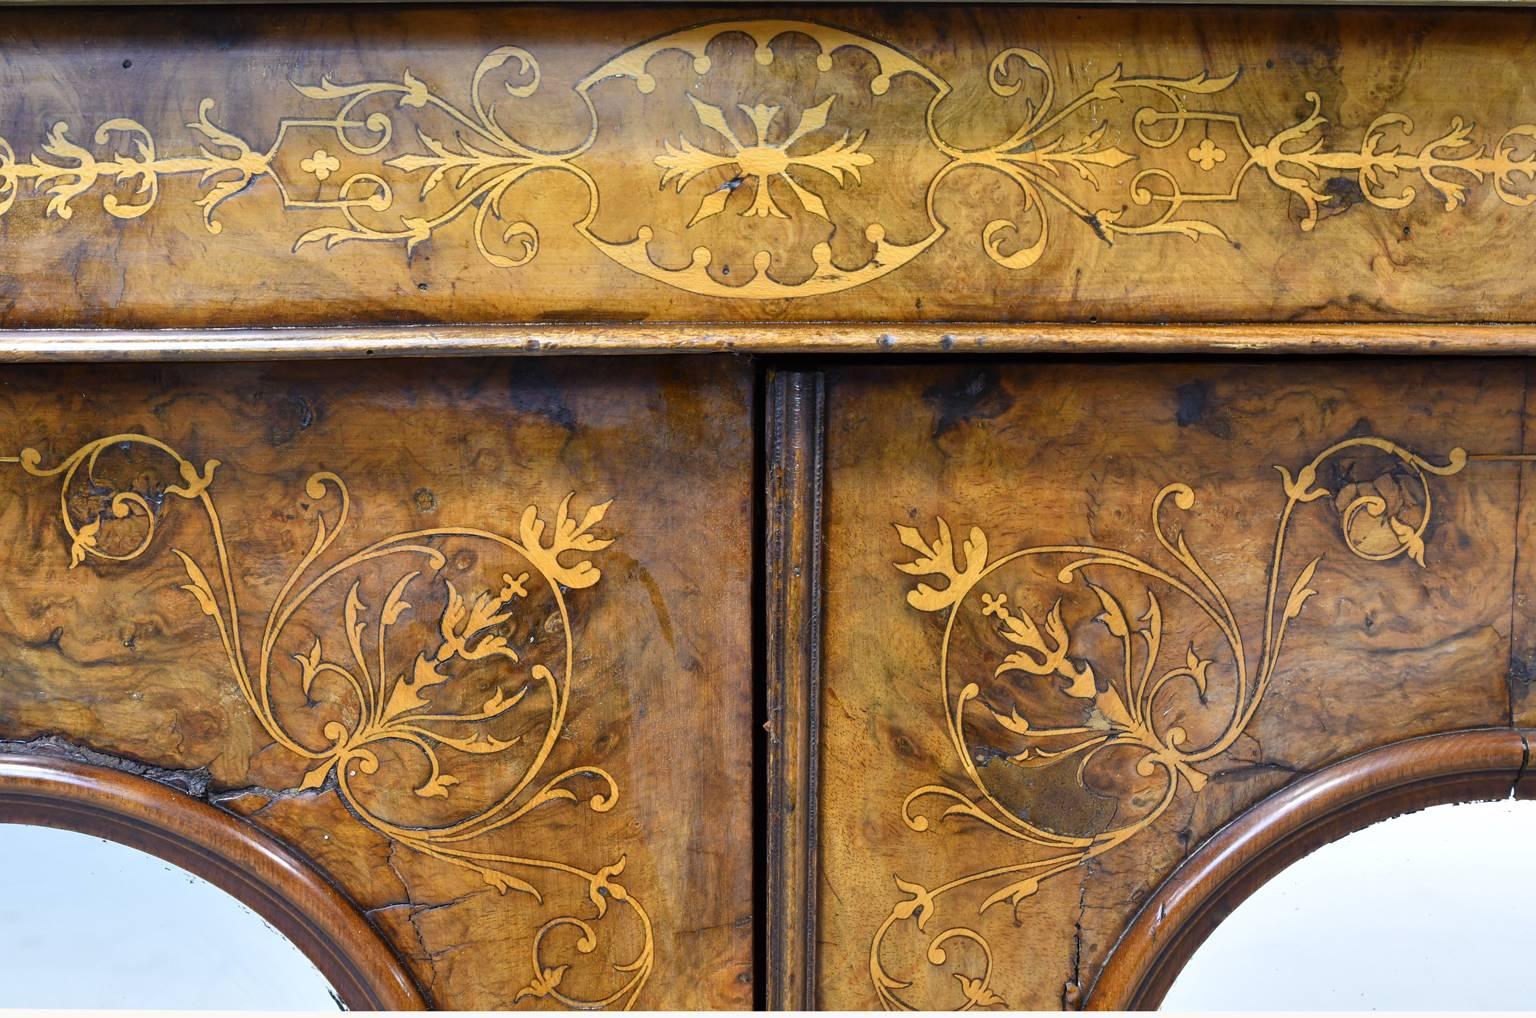 Beveled 19th Century English Sideboard in Burl Walnut with Marquetry withMarble Top